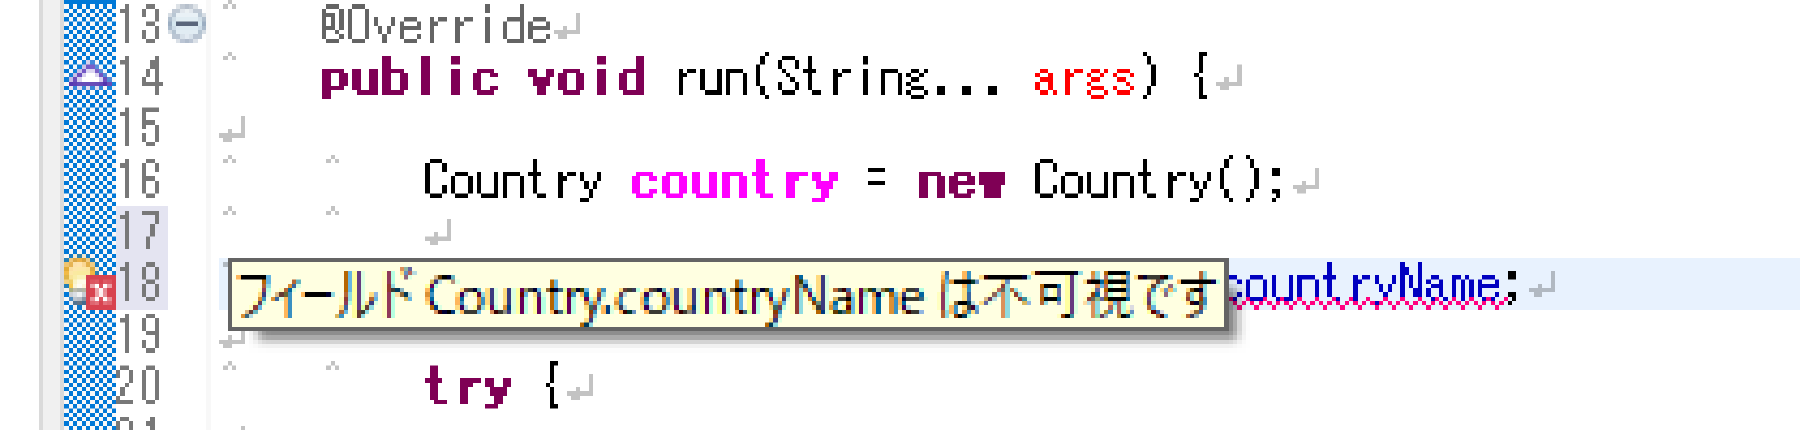 countryName は private なので、外部から参照できない